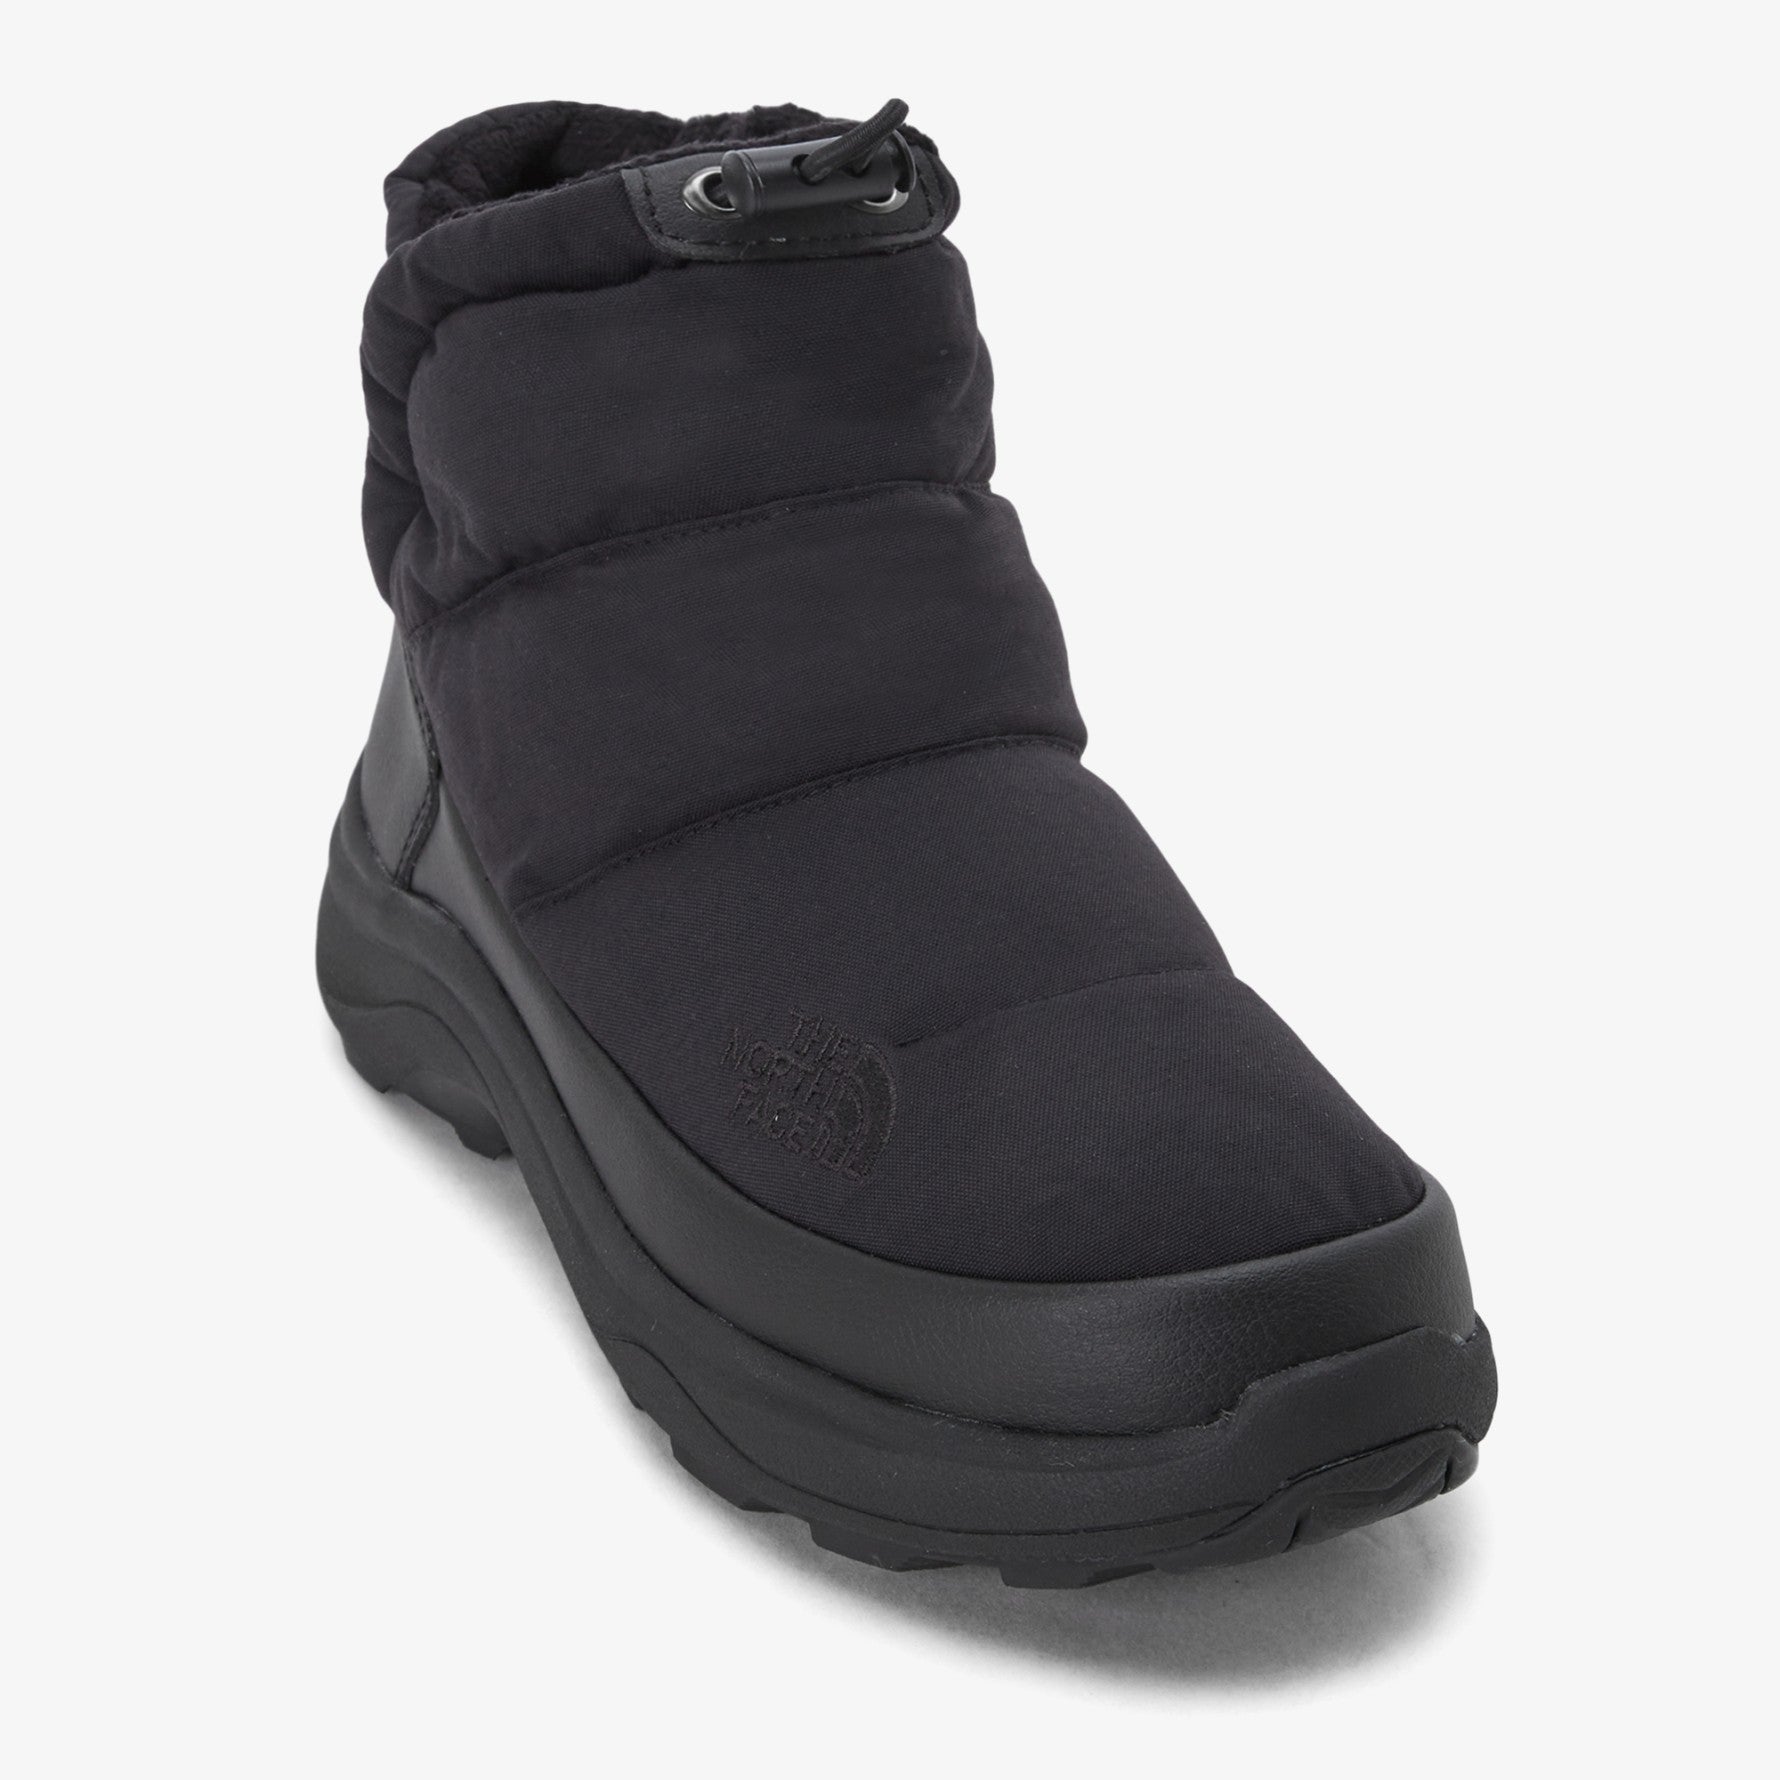 THE NORTH FACE] BOOTIE SHORT _ REAL_BLACK (NS99P54K) 23~29 ECO T 